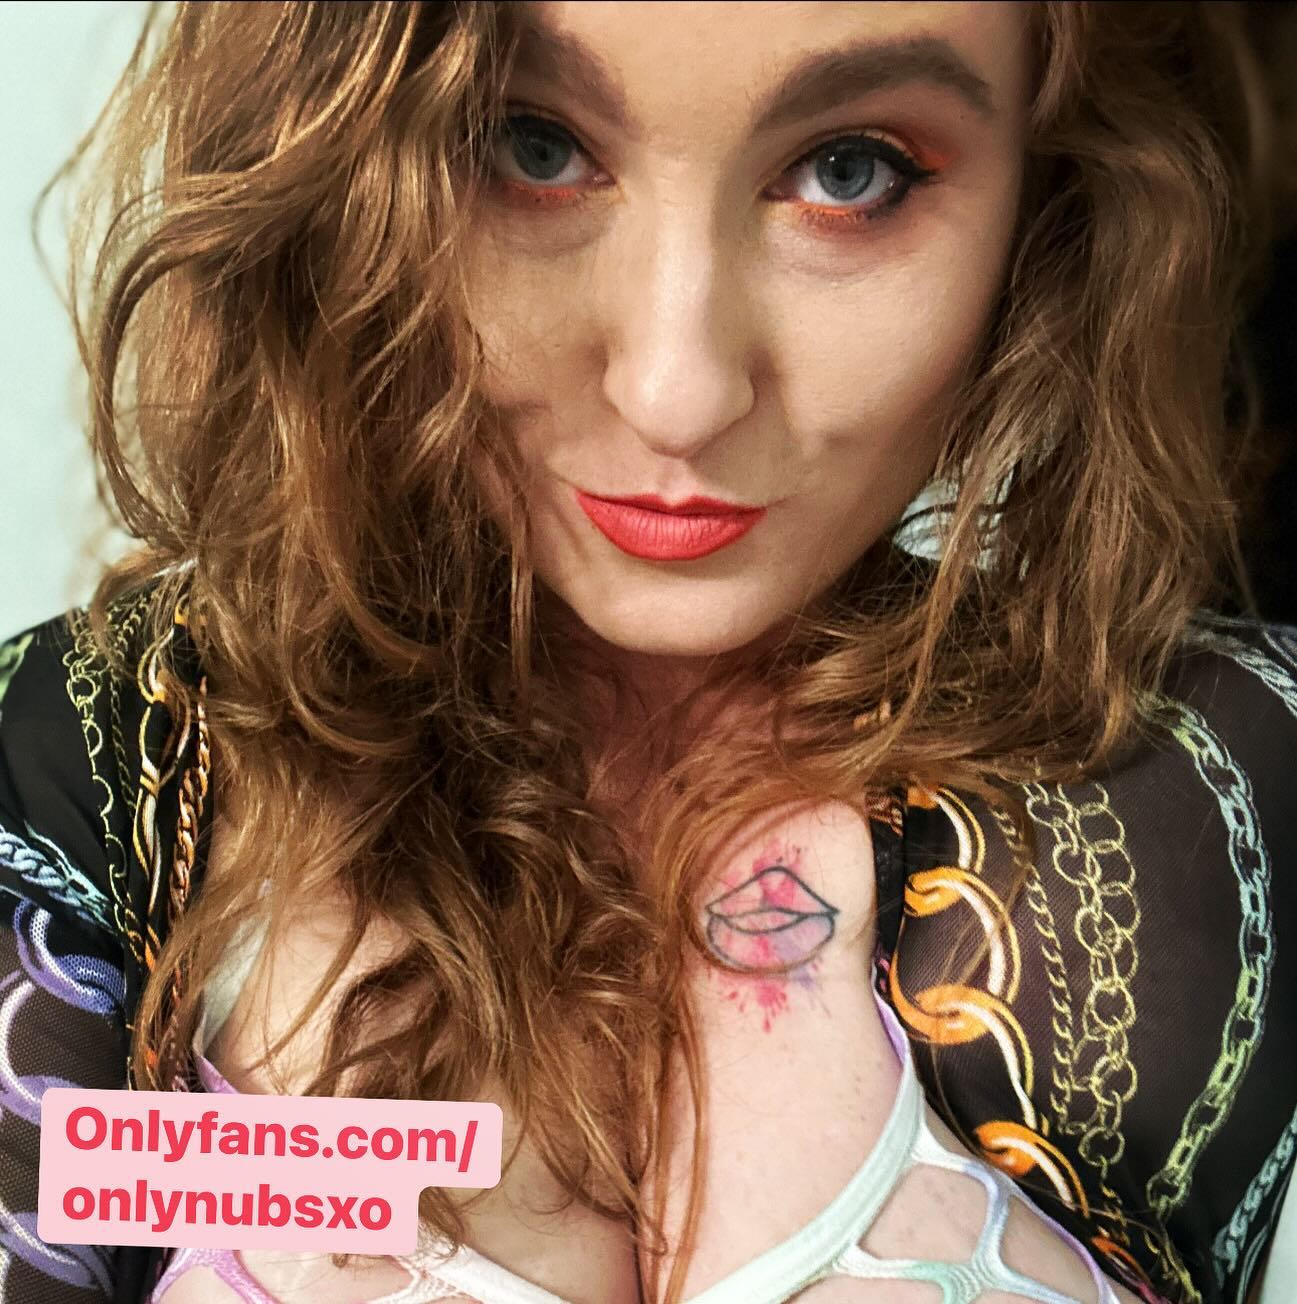 #the1rmdbndt #onlynubsxo #subscribe #onlyfansgirls #amputeebabe #paypigswelcomed #devotee #adultsonly #feet #nub #naturalgirl